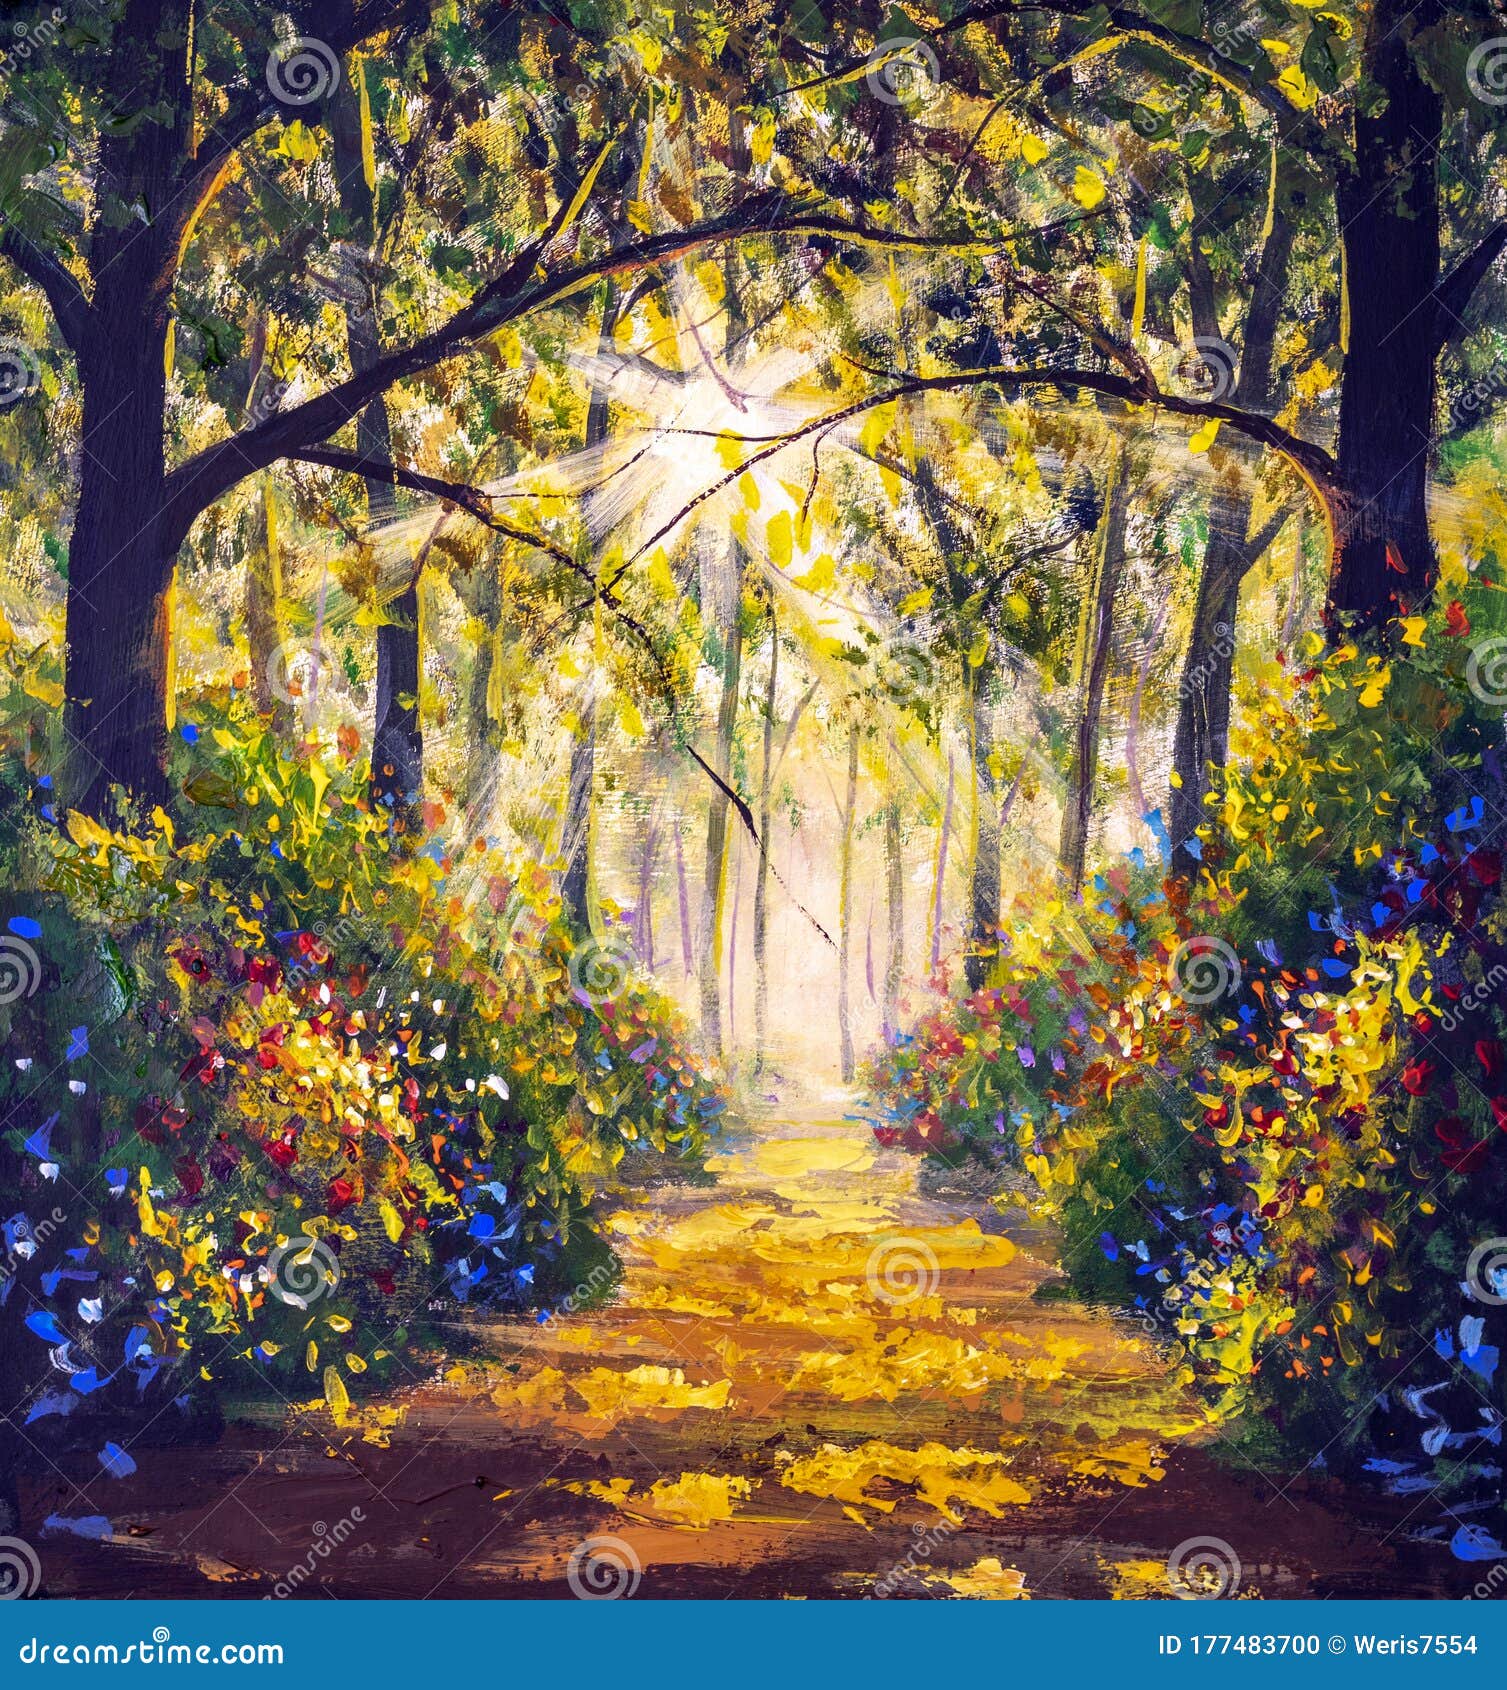 Sunny Forest Wood Trees Original Oil Painting. Stock Photo - Image of ...